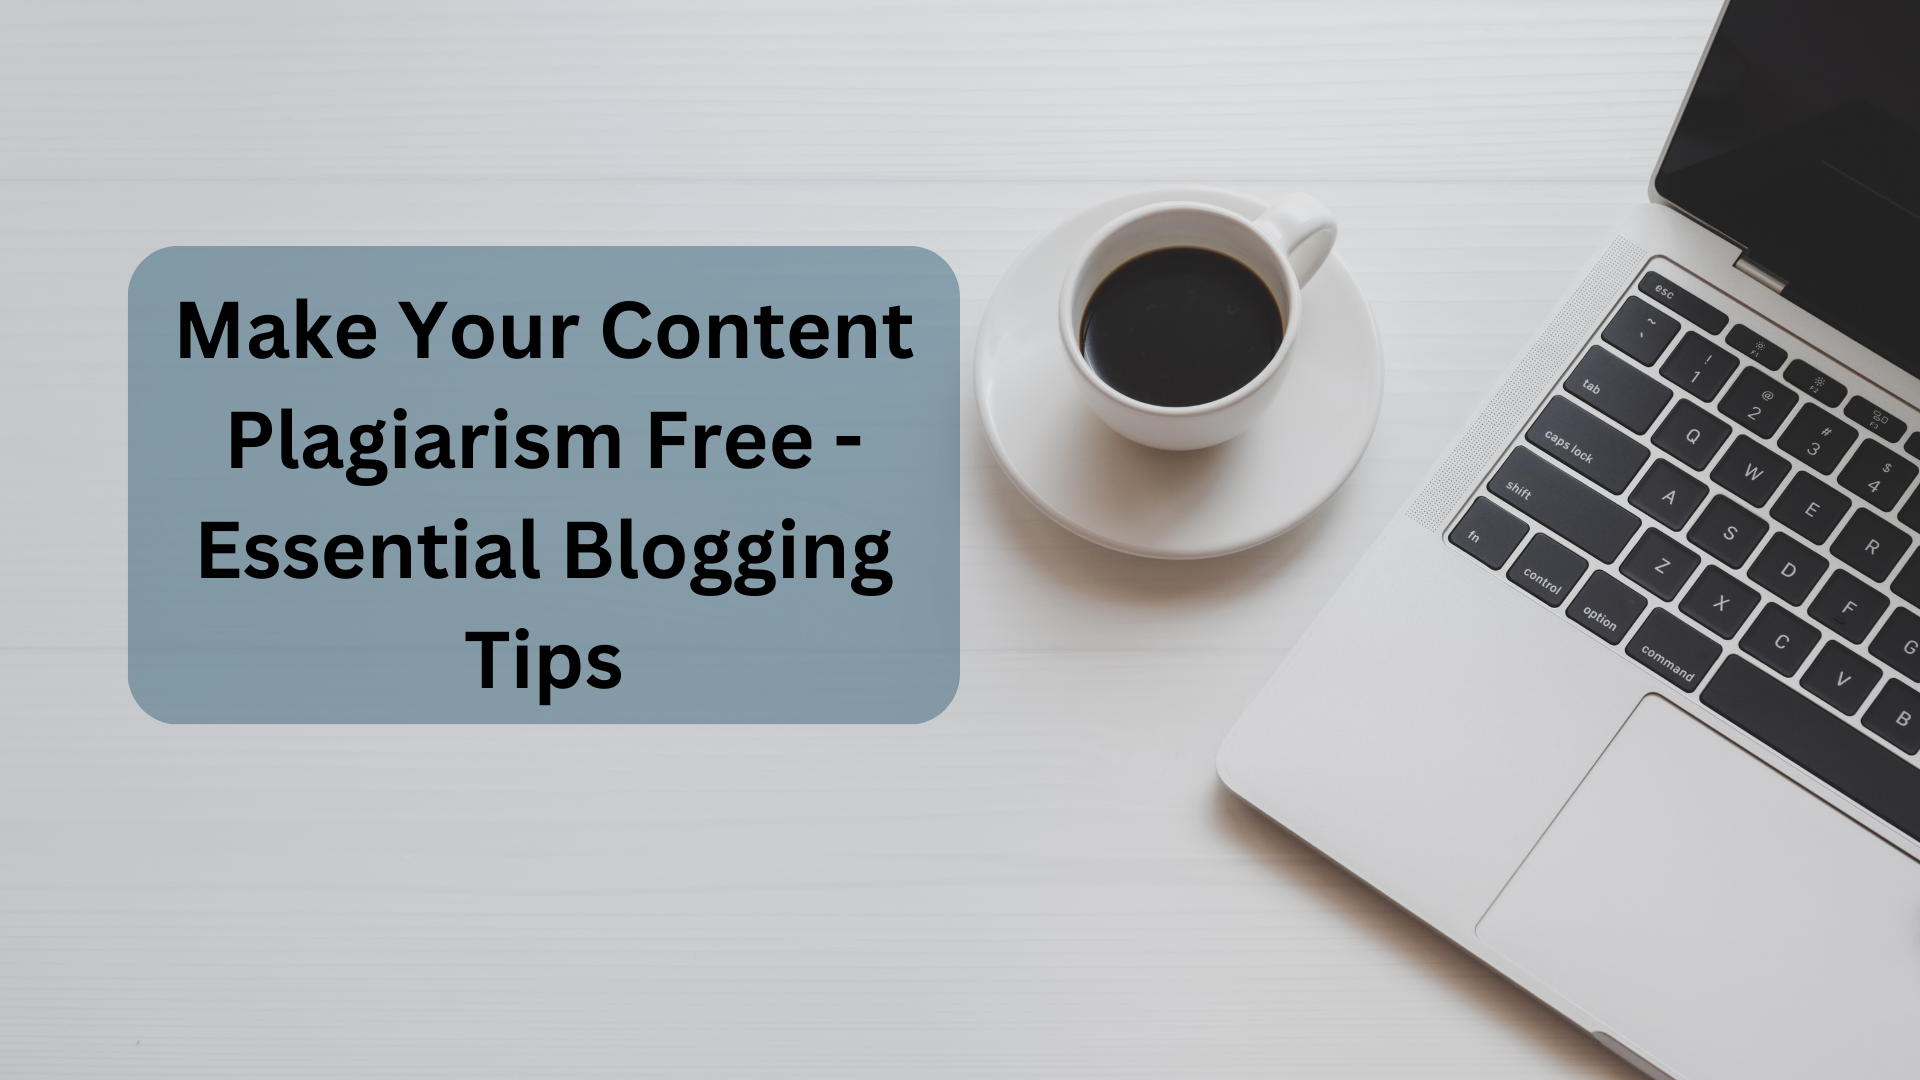 Make Your Content Plagiarism Free - Essential Blogging Tips-Classiblogger